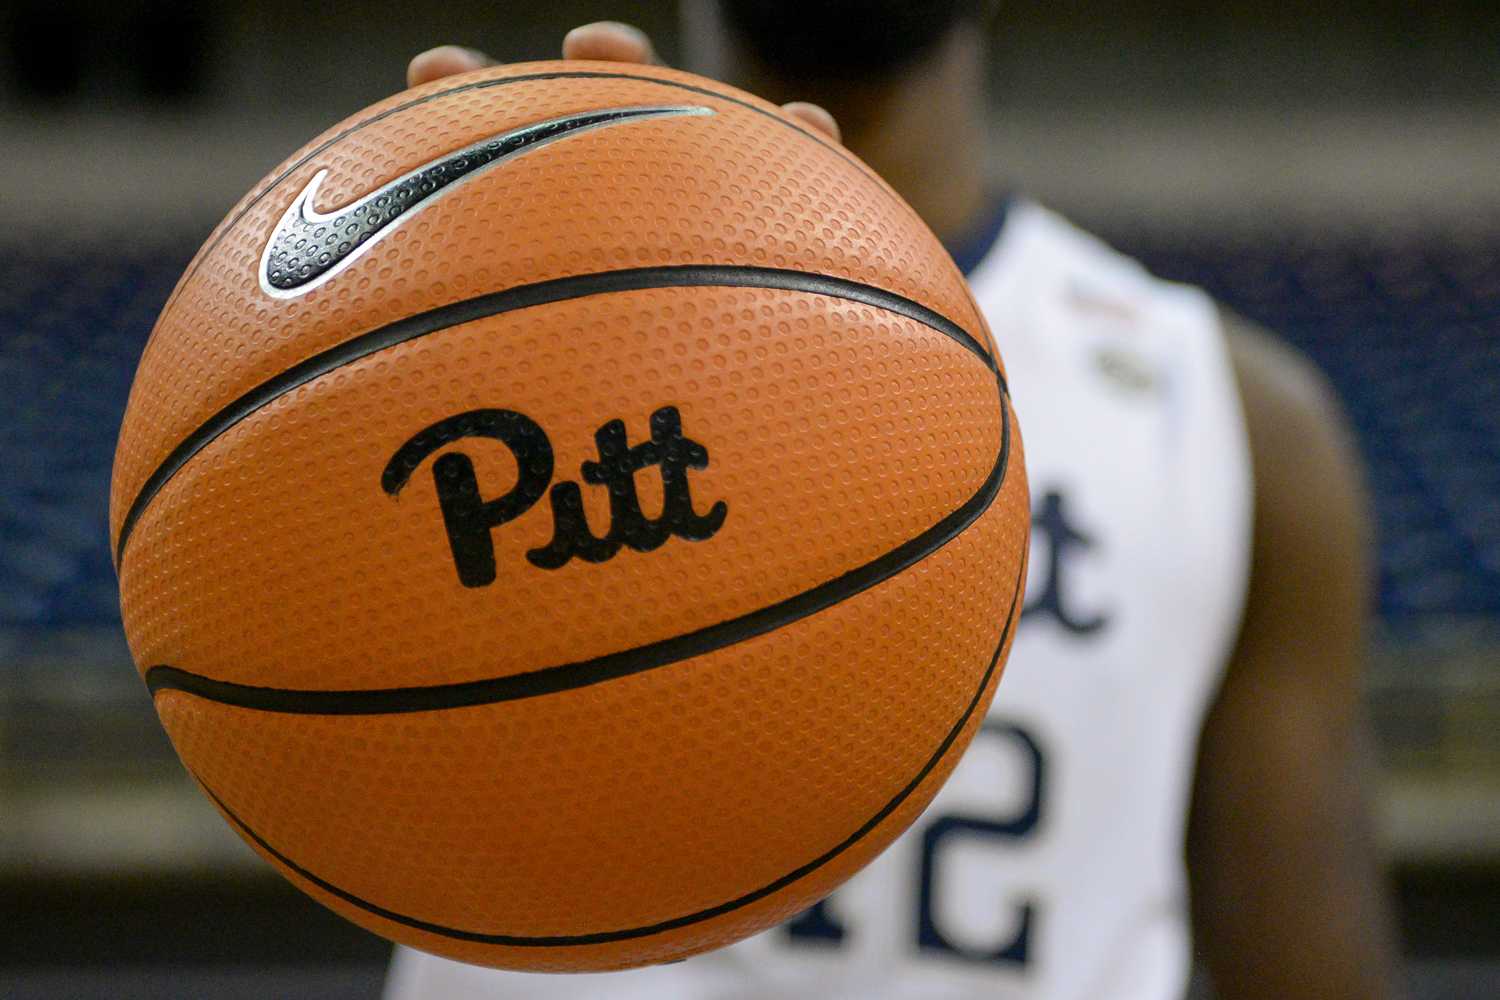 Keeping up with Pitt's recruiting trail The Pitt News